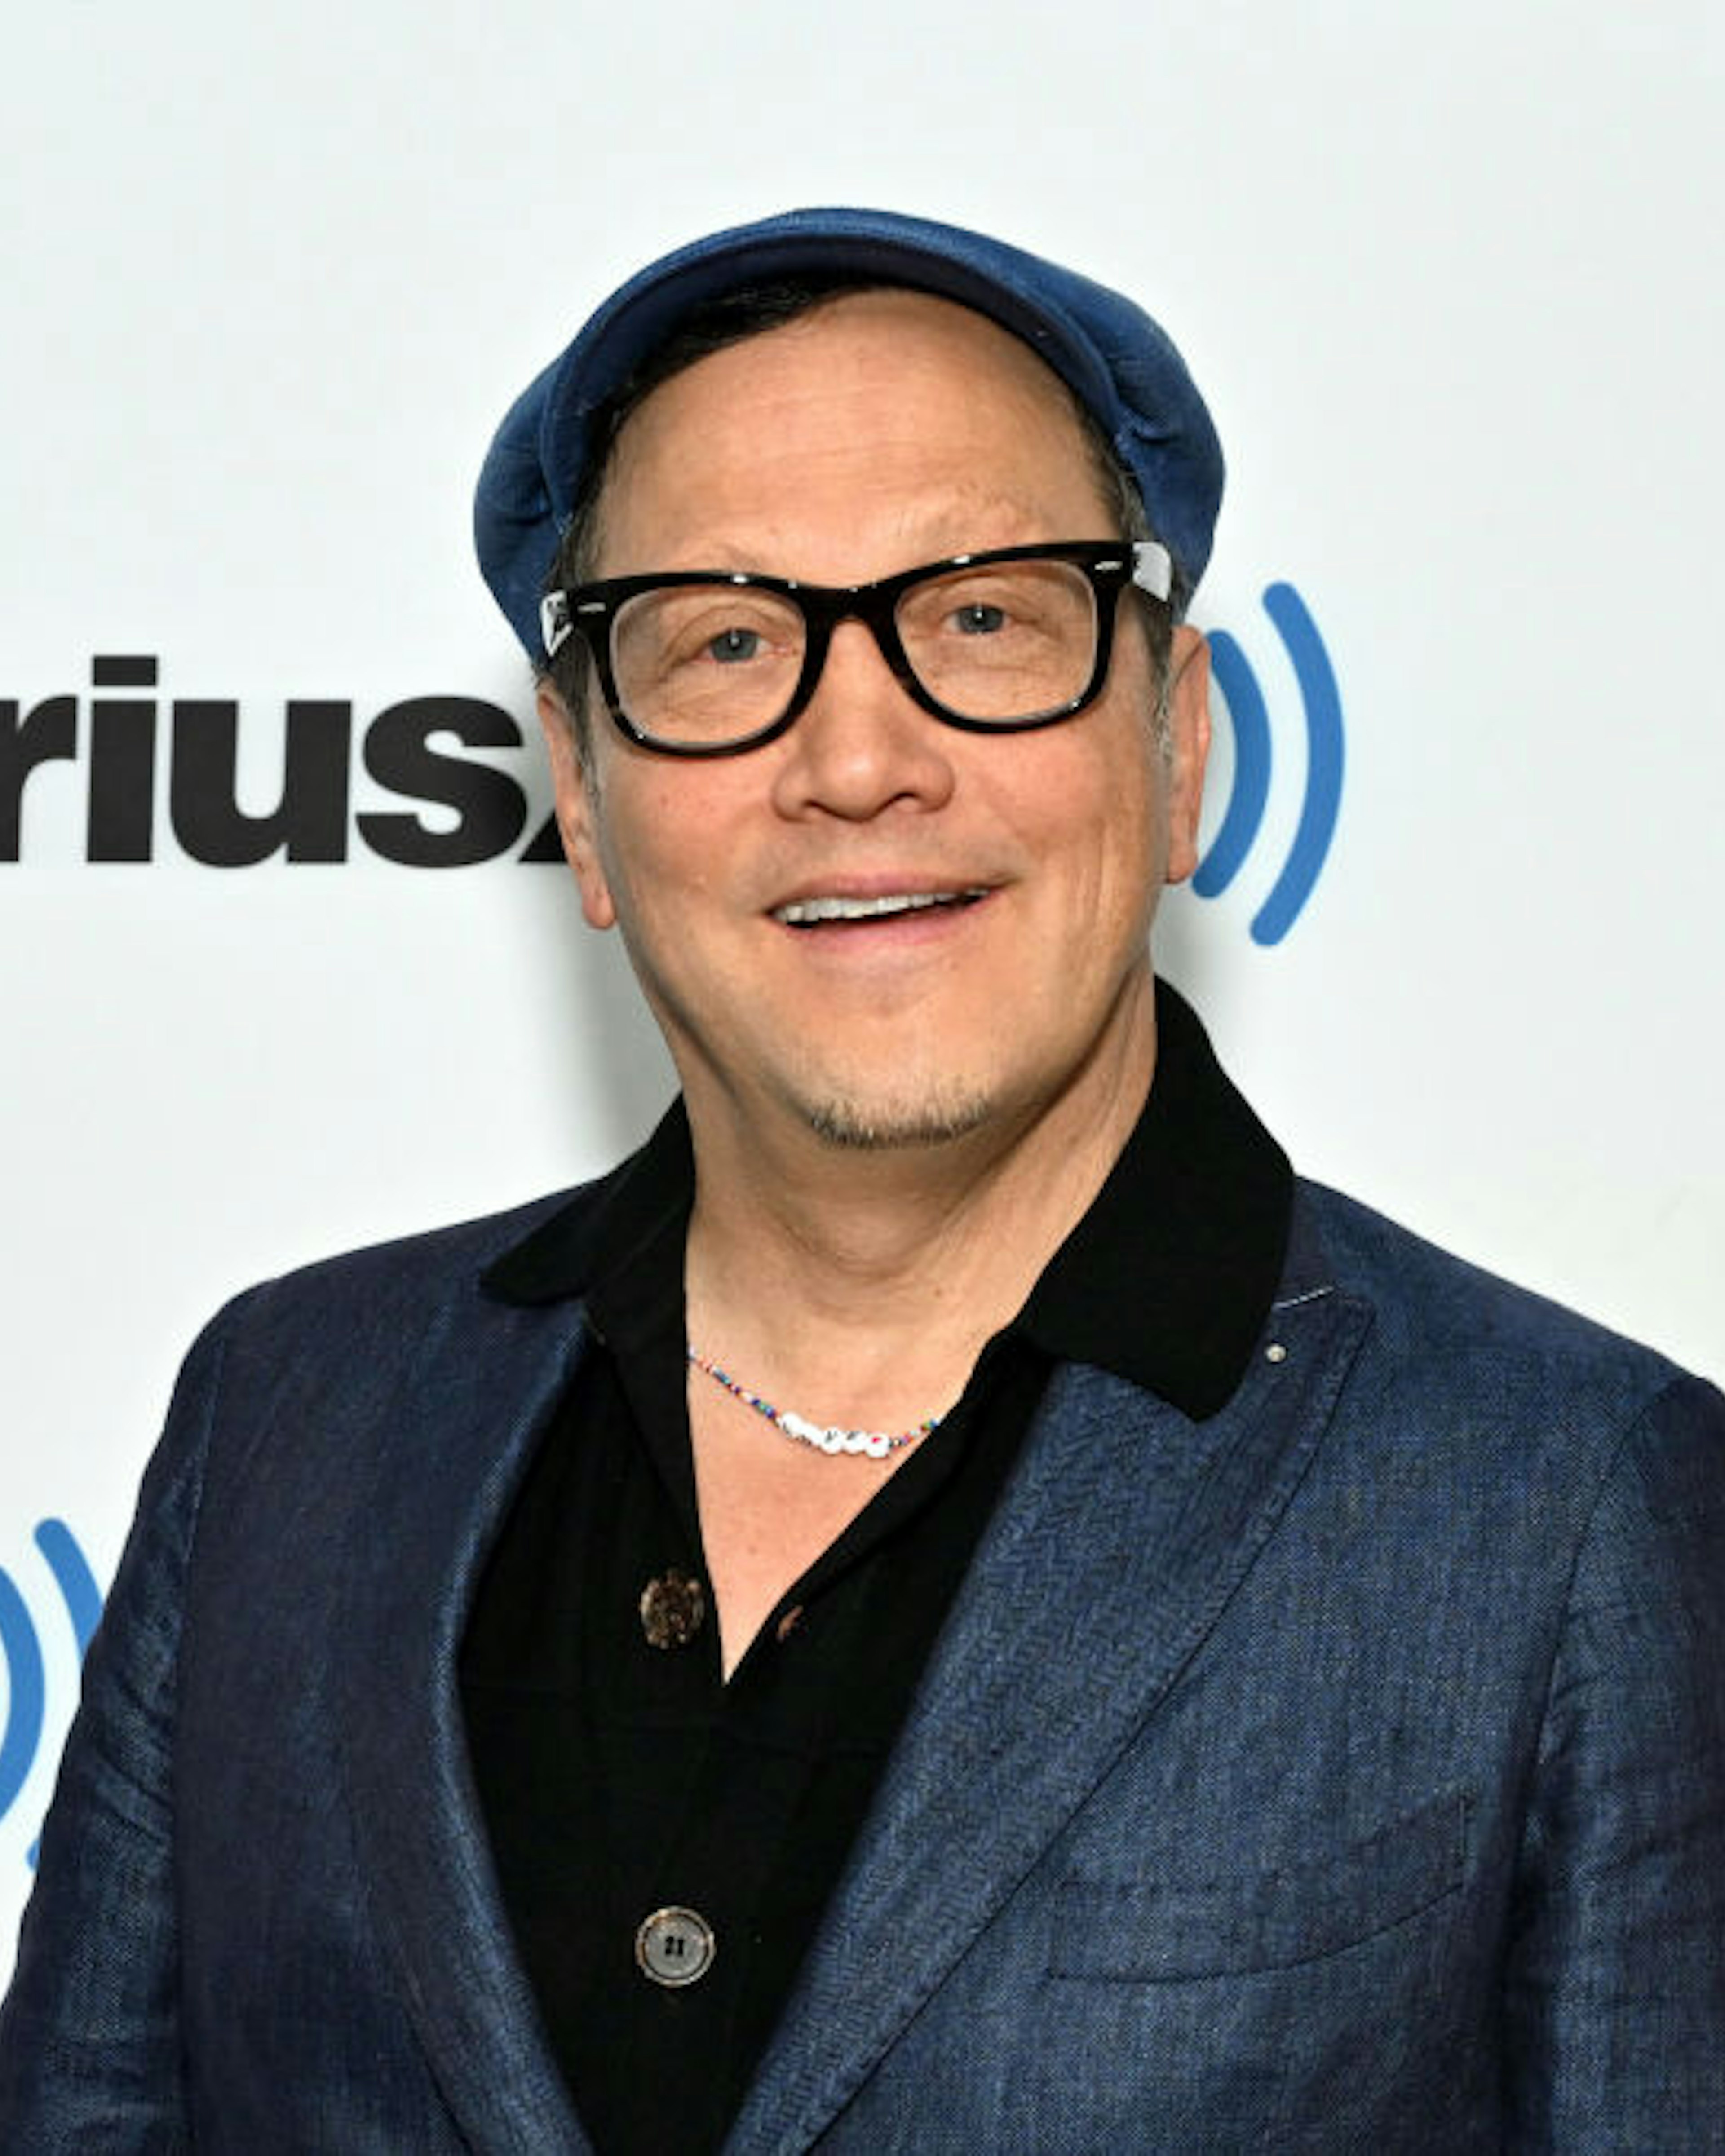 NEW YORK, NEW YORK - JUNE 20: (EXCLUSIVE COVERAGE) Rob Schneider visits SiriusXM Studios on June 20, 2023 in New York City. (Photo by Slaven Vlasic/Getty Images)